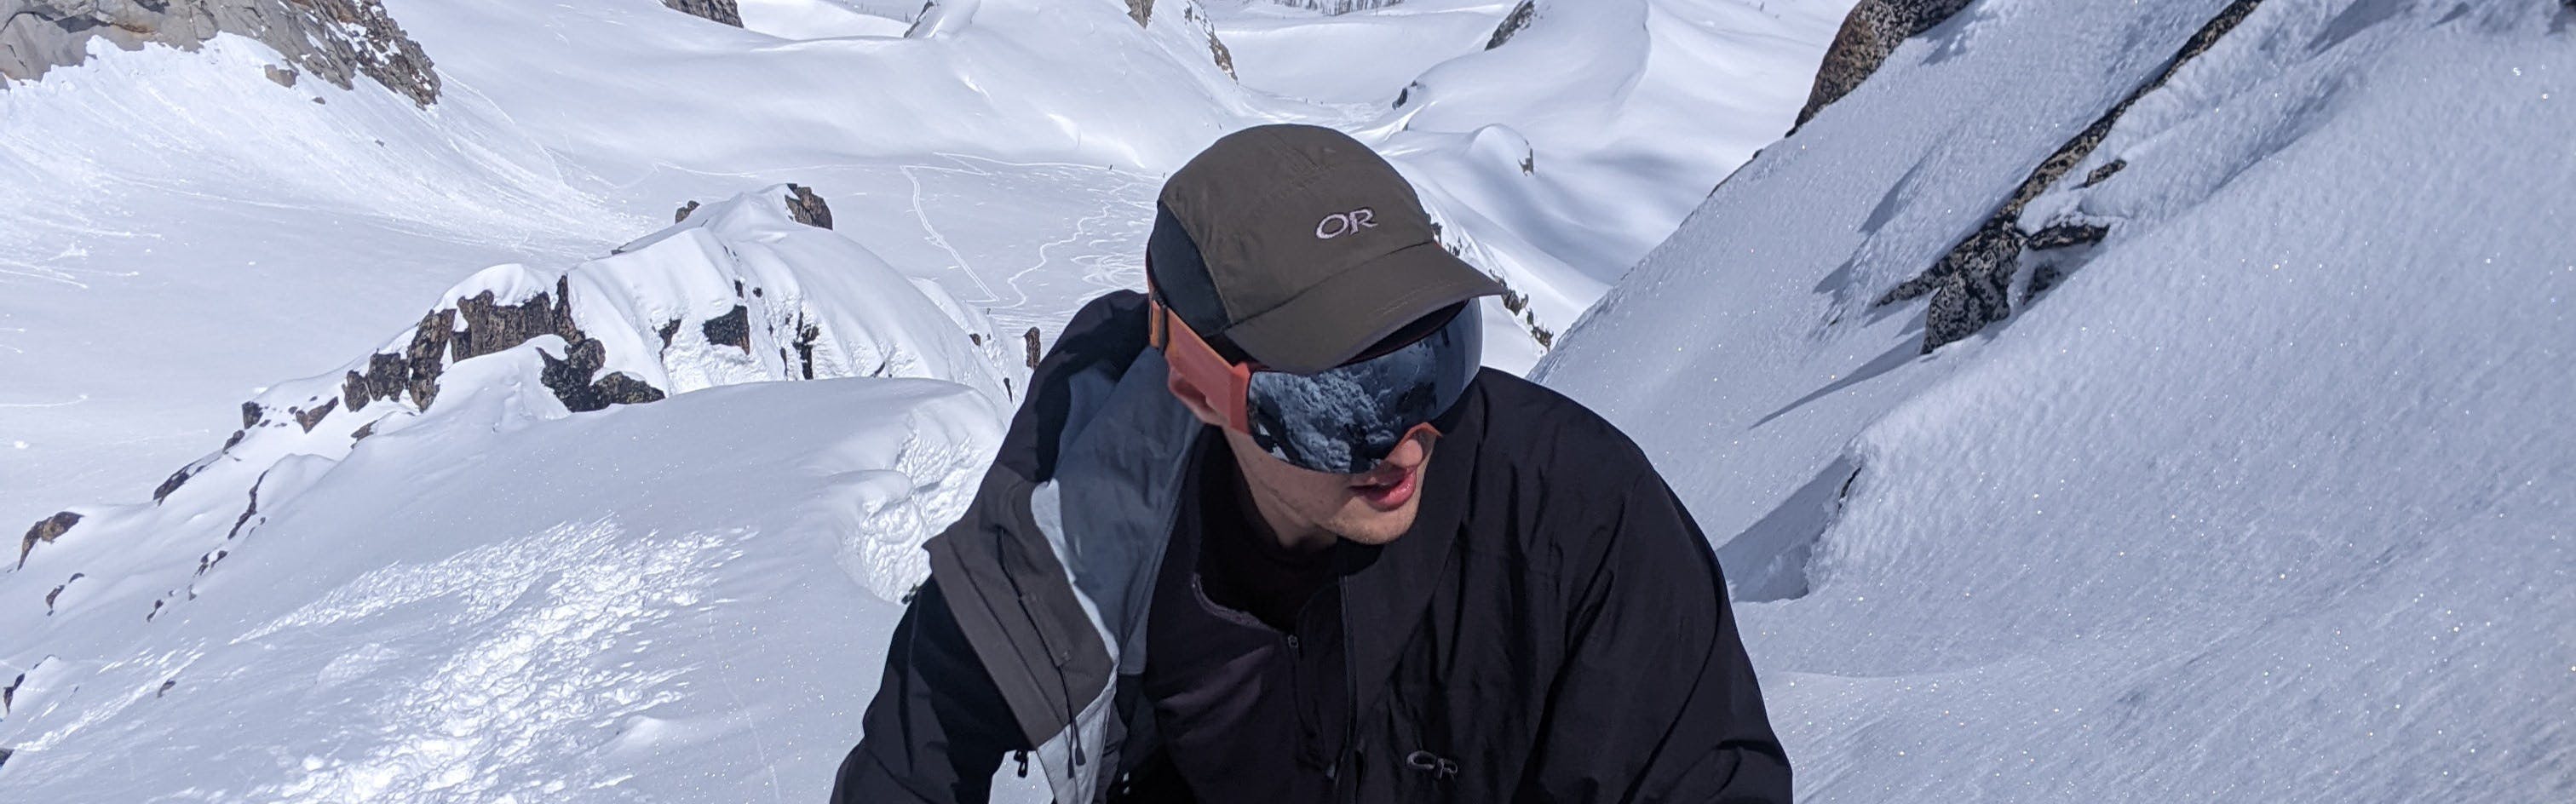 A skier hiking up a snowy area in the Smith I/O MAG Goggles.